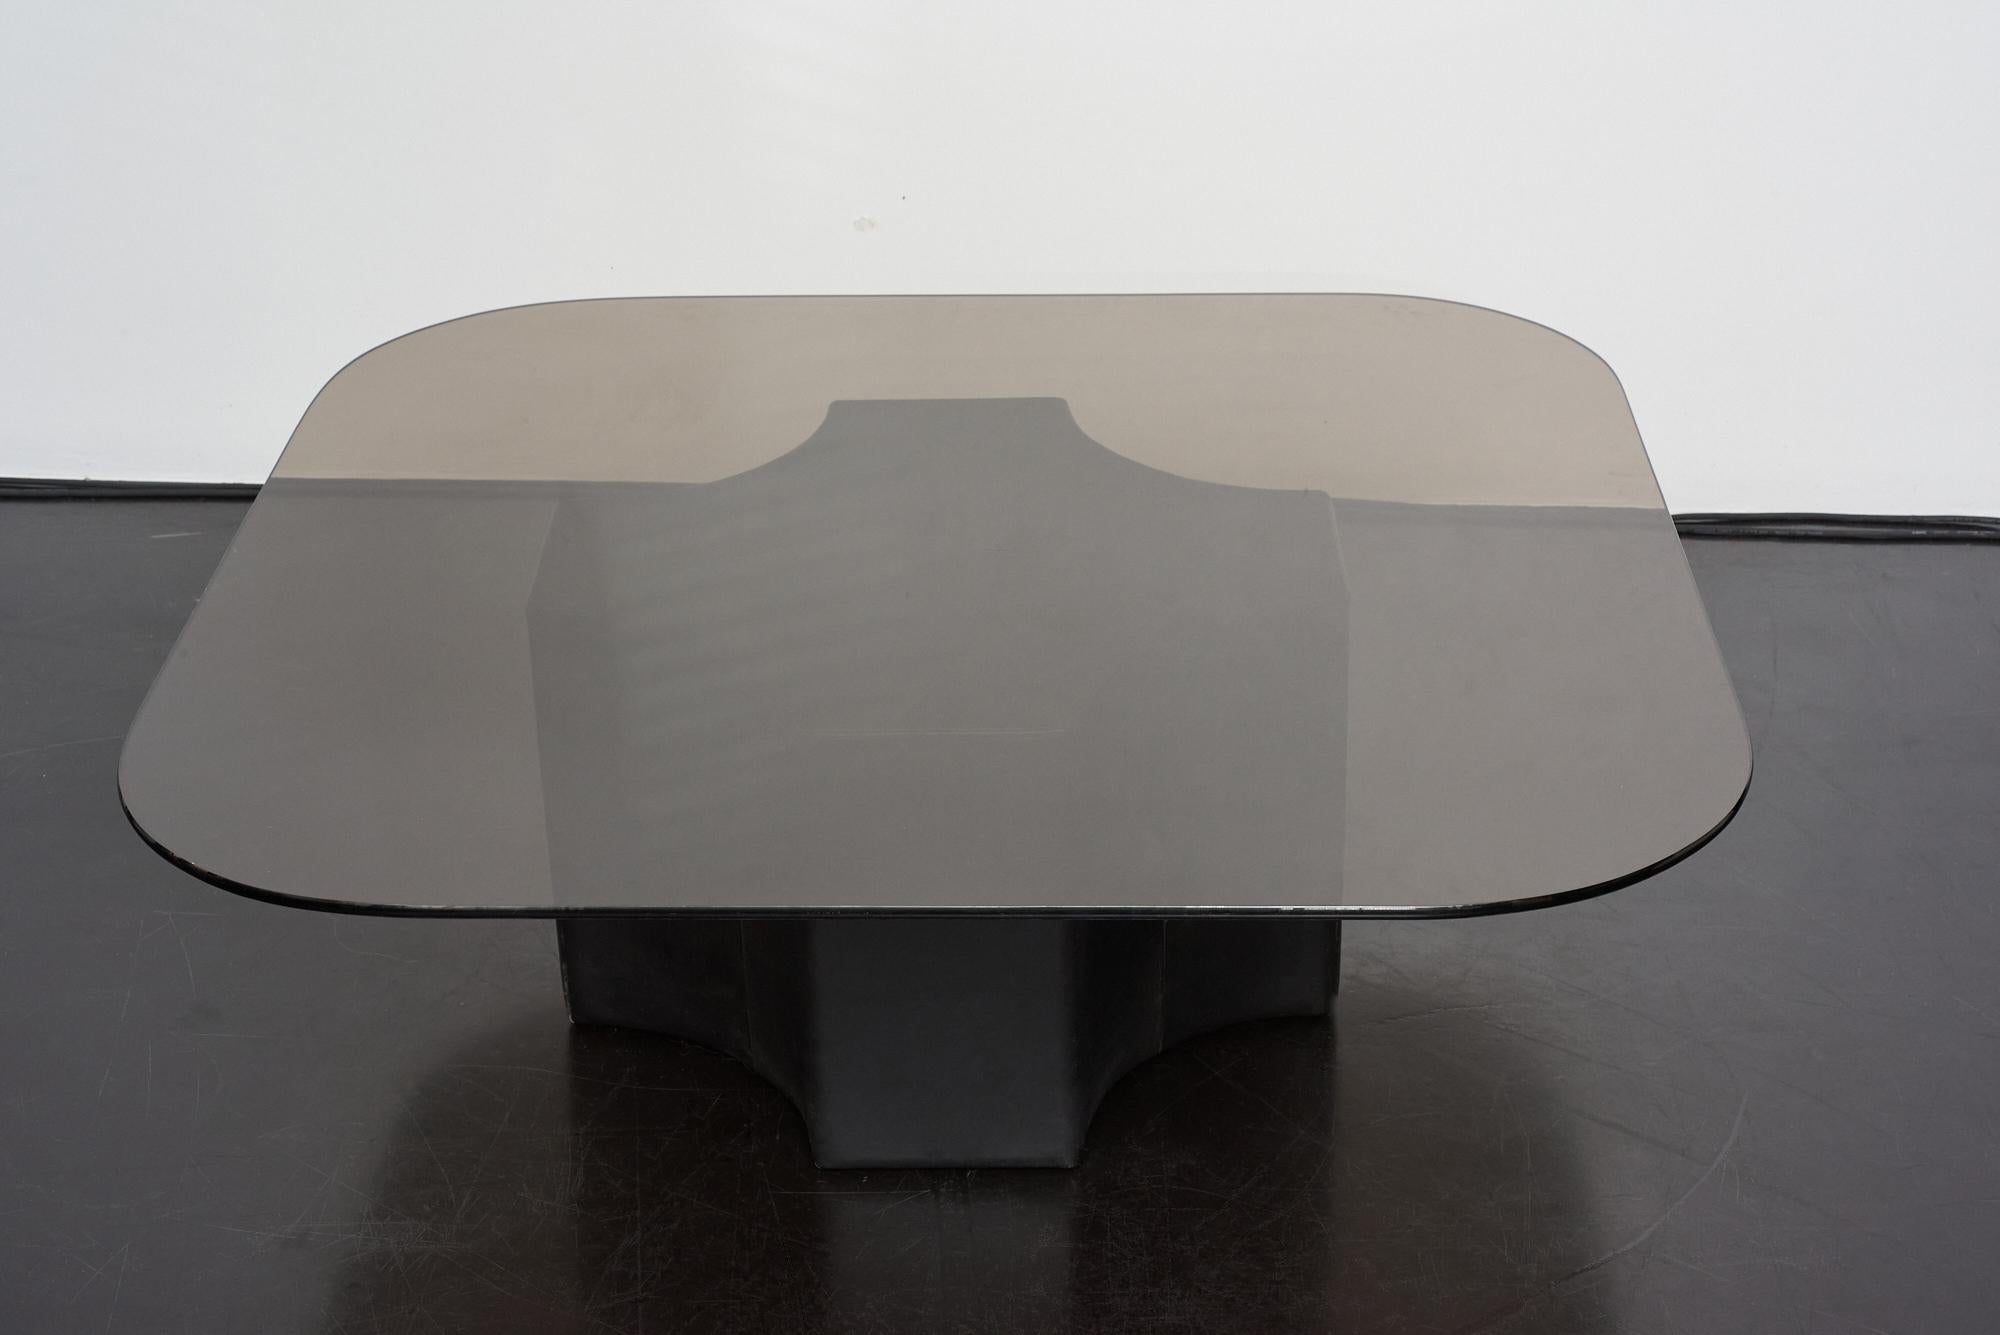 Beautiful and elegant leather coffee table with round edged smoked glass top
Excellent condition.